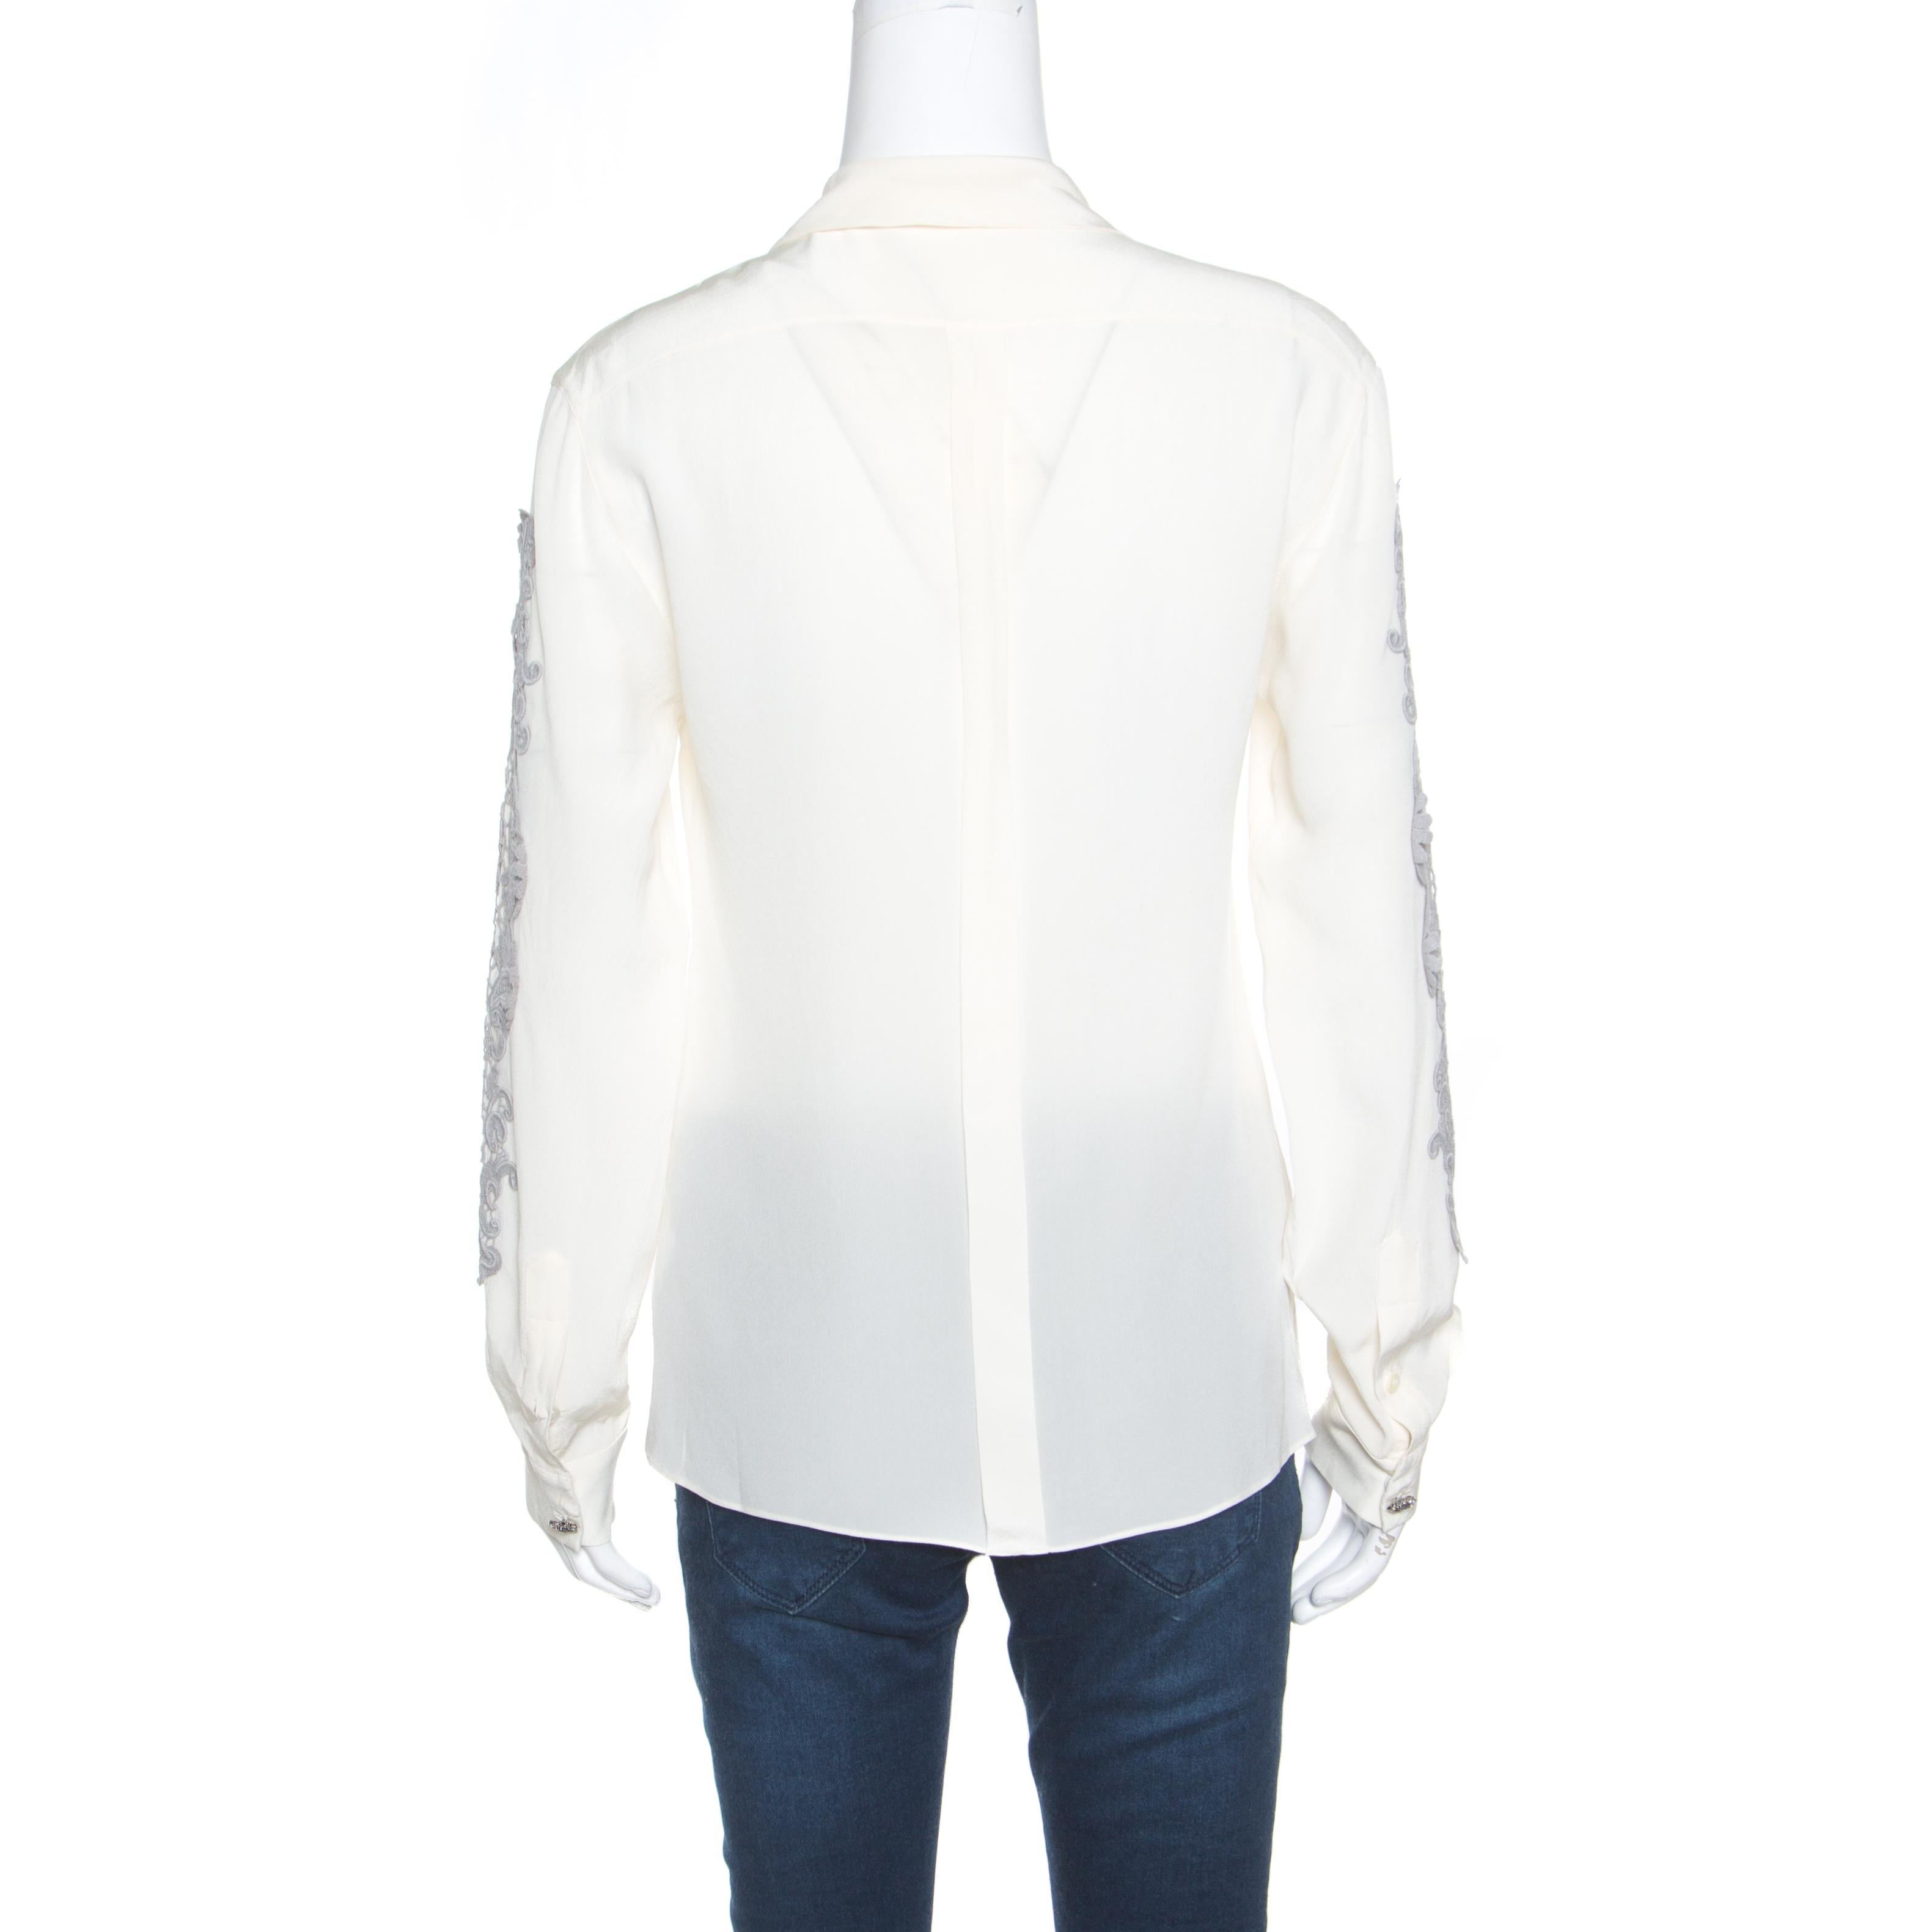 You'll find occasions to wear this lovely cream blouse from Dolce and Gabbana! It is made of a silk and crepe blend and features a bow tie detailing on the neckline. It flaunts long sleeves with an artistic lace applique design on the sides. Pair it